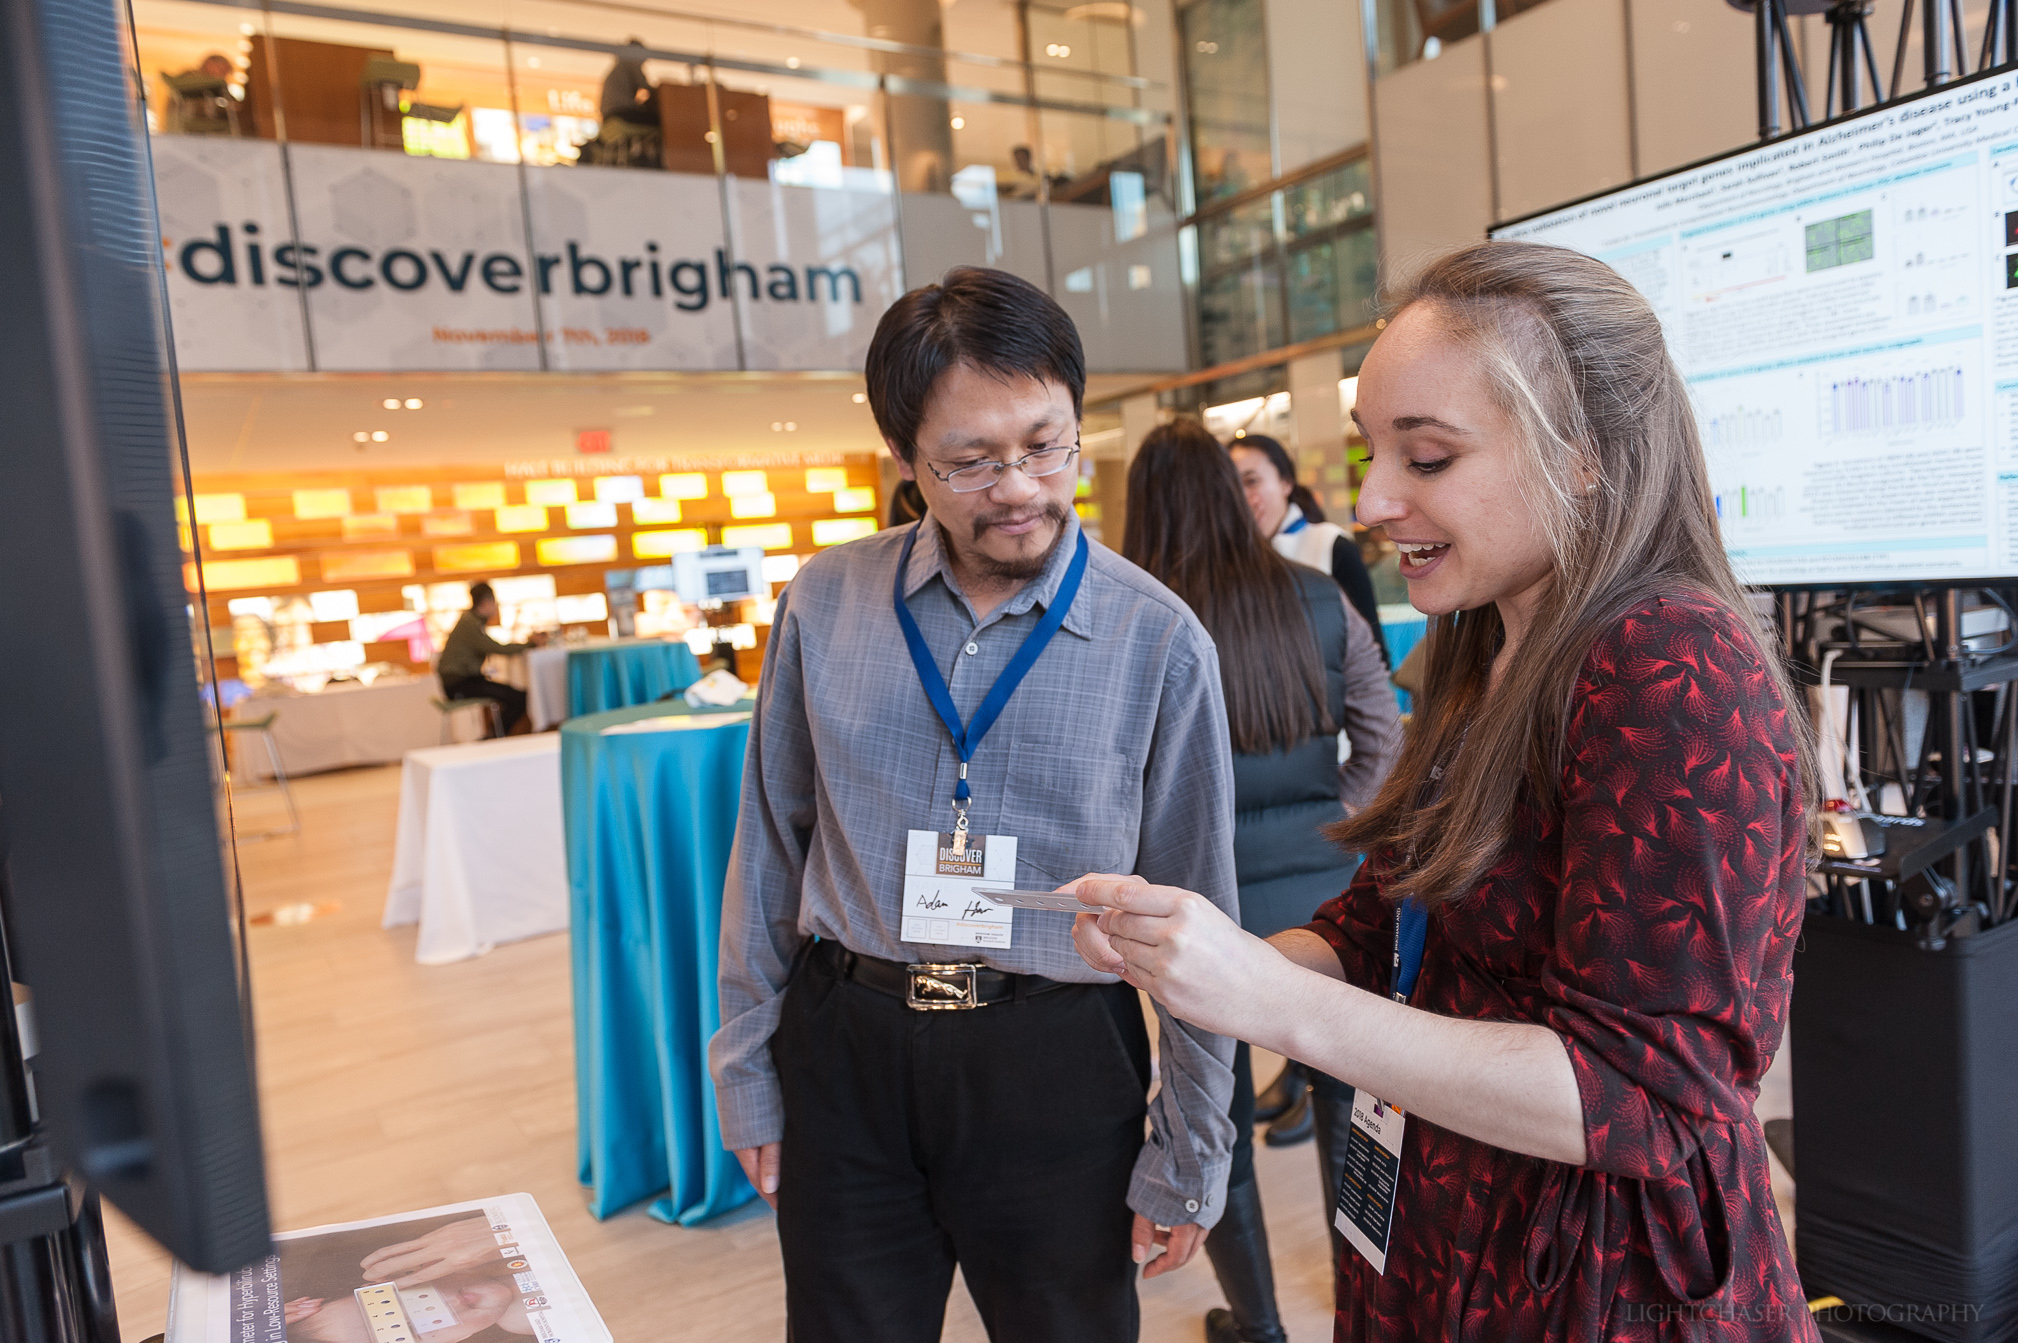 Discover Brigham attendees